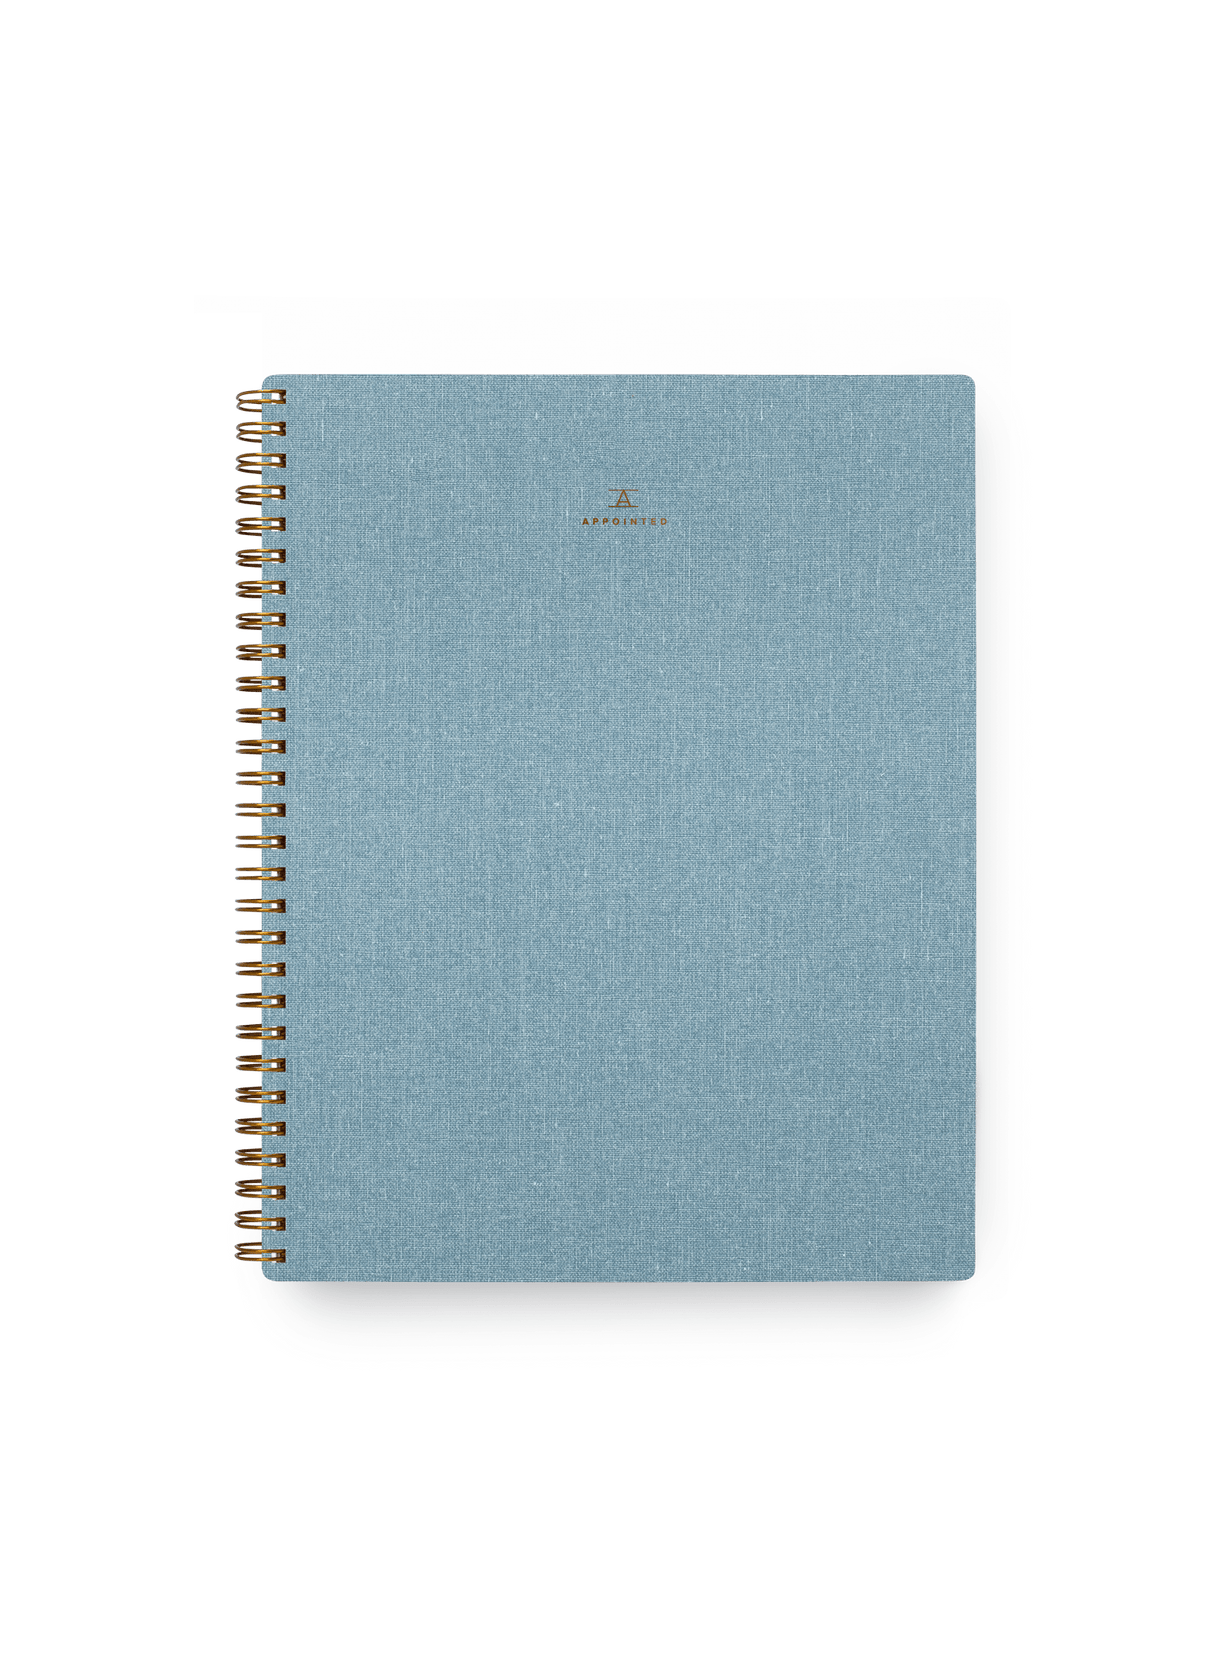 Appointed Notebook in Chambray Blue bookcloth with brass wire-o binding front view || Chambray Blue